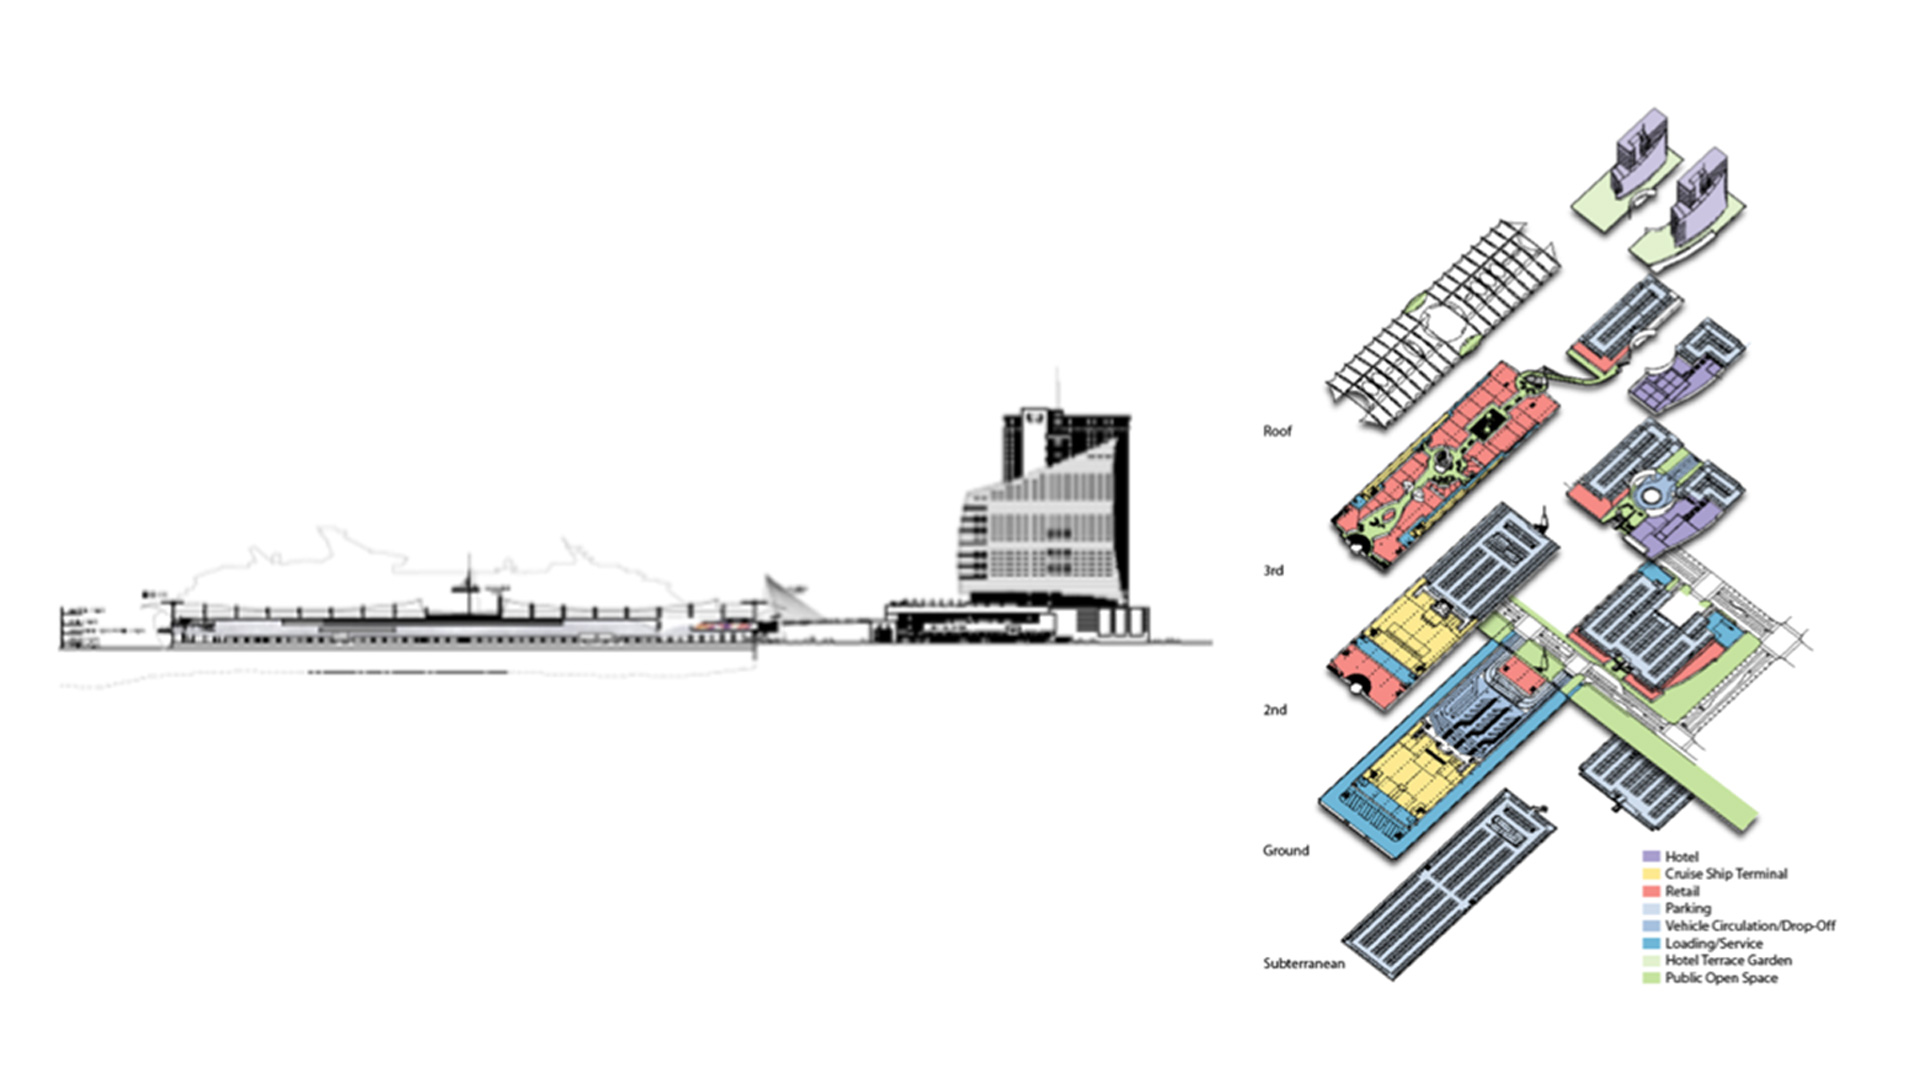 Port of San Diego Cruise Terminal and Multi-Purpose Concept - image